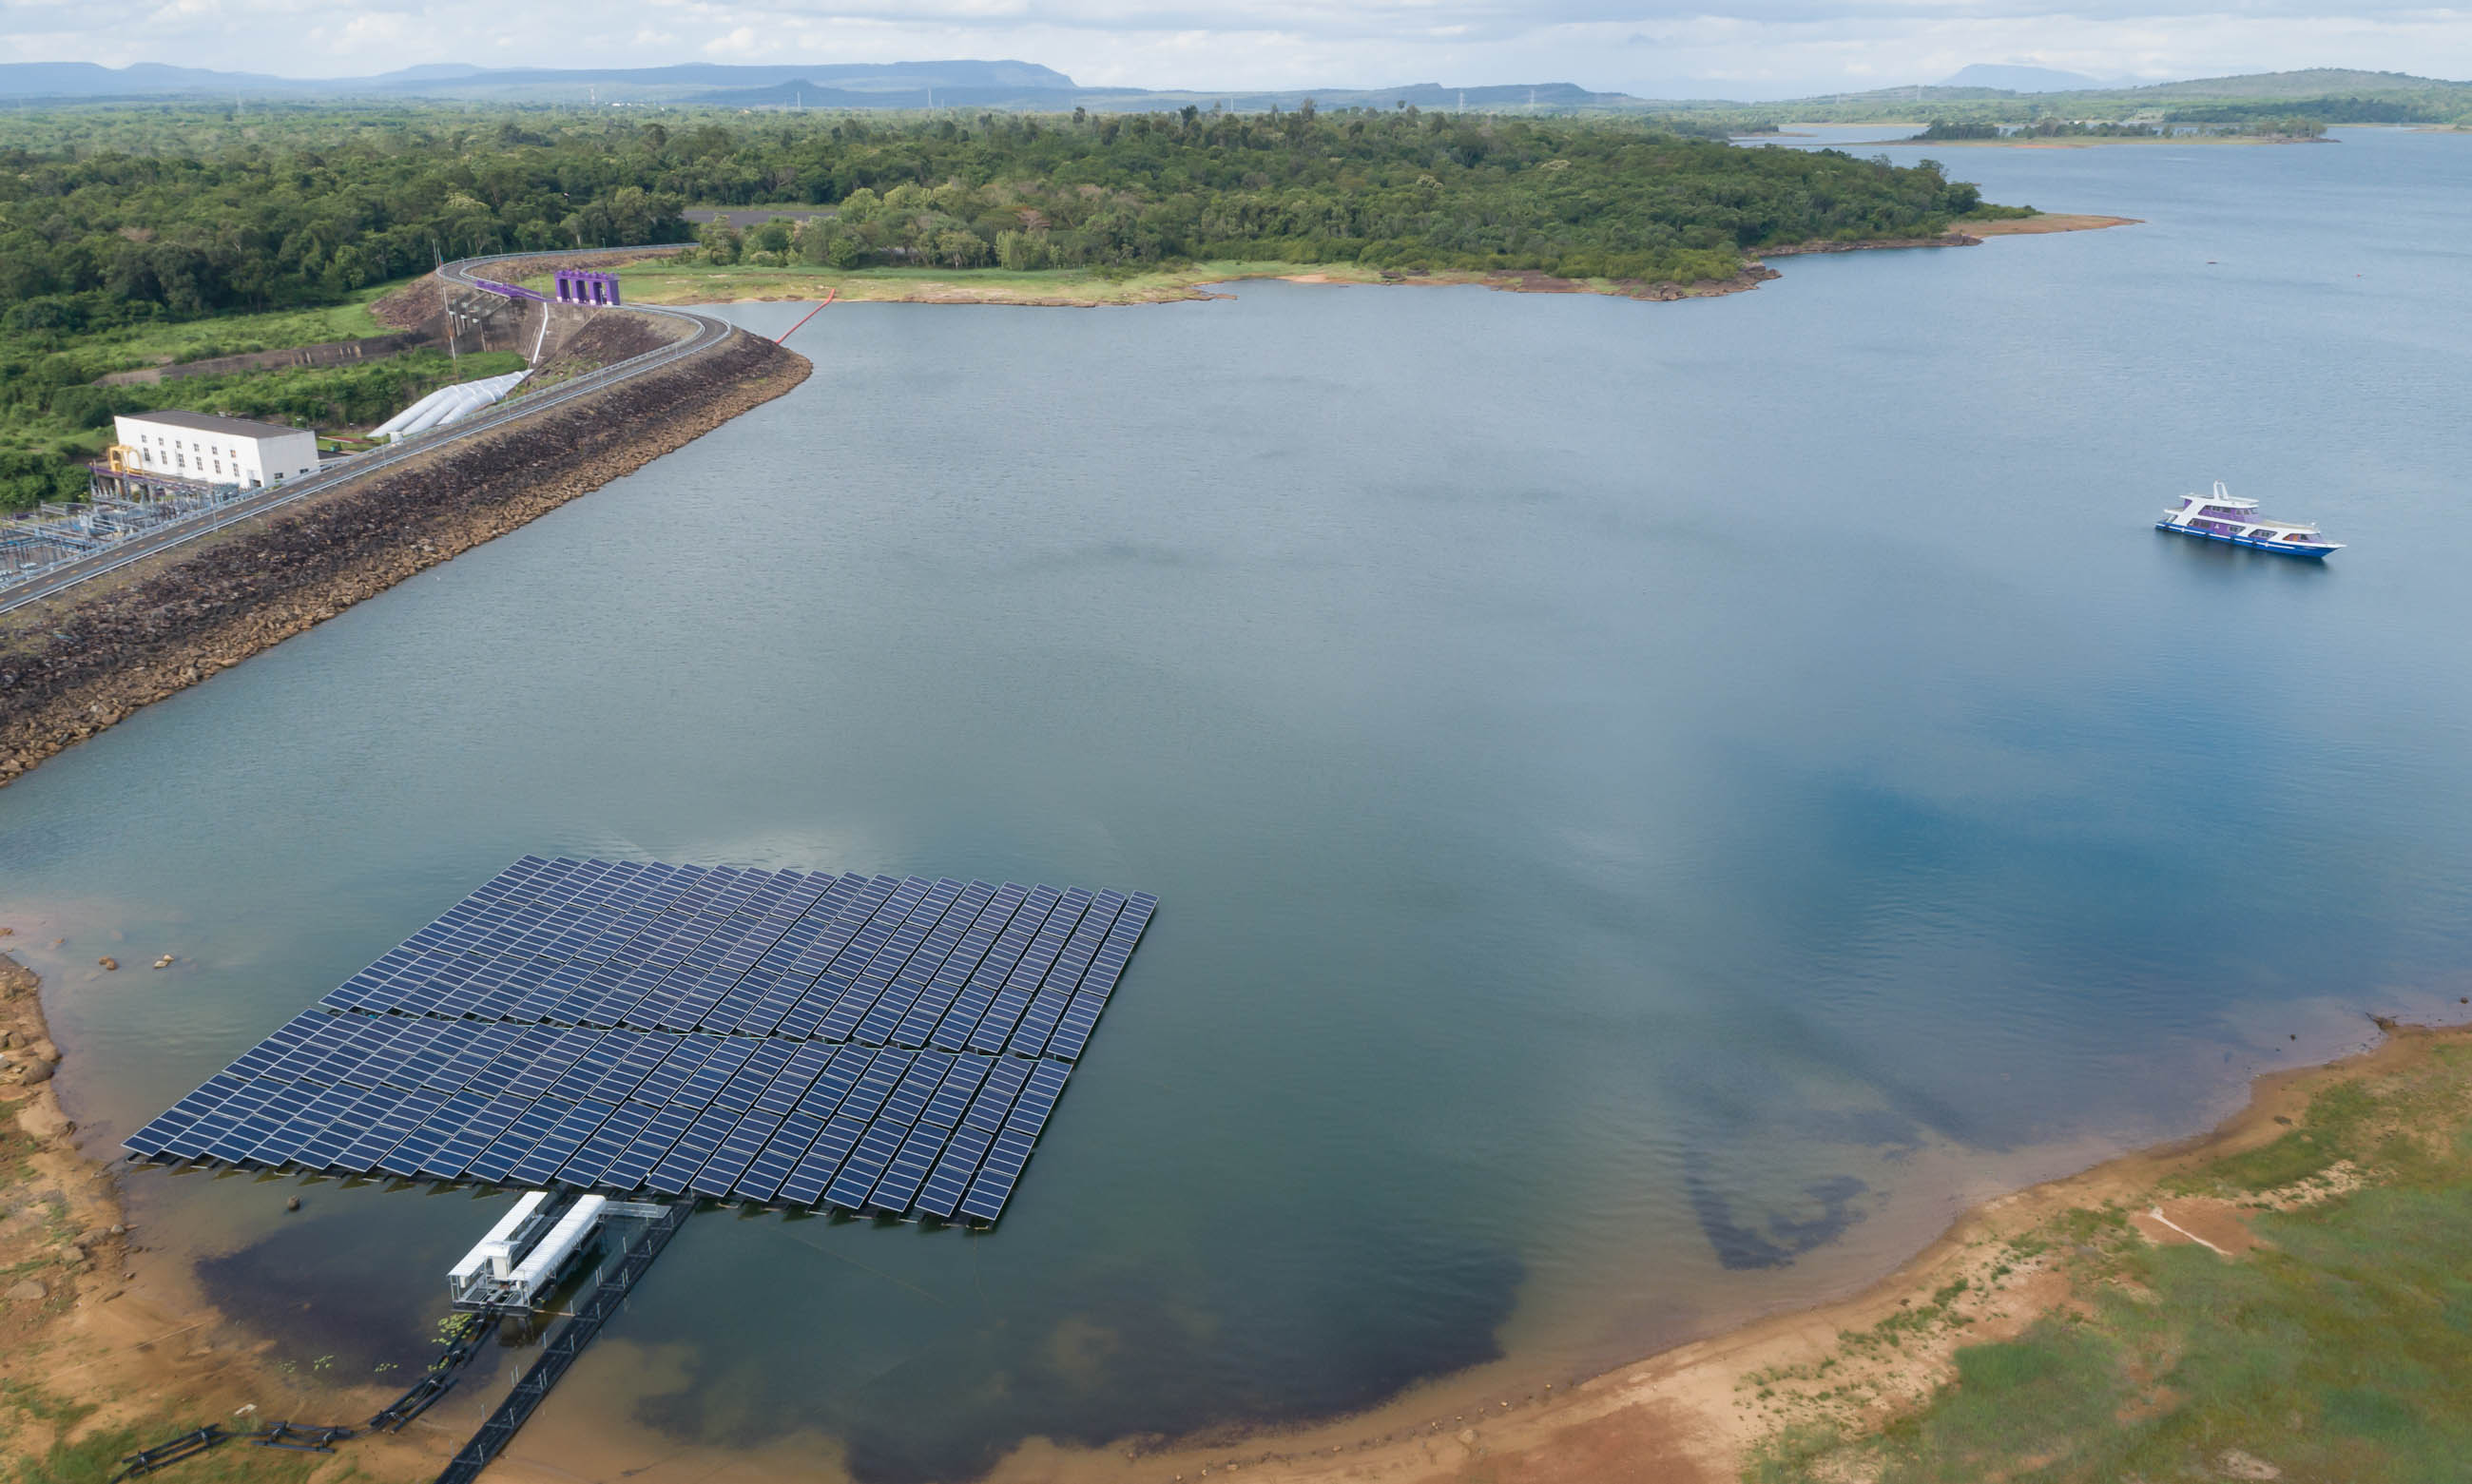 Aerial view of floating solar panels on a lake (Image: KissShot/Adobe Stock)